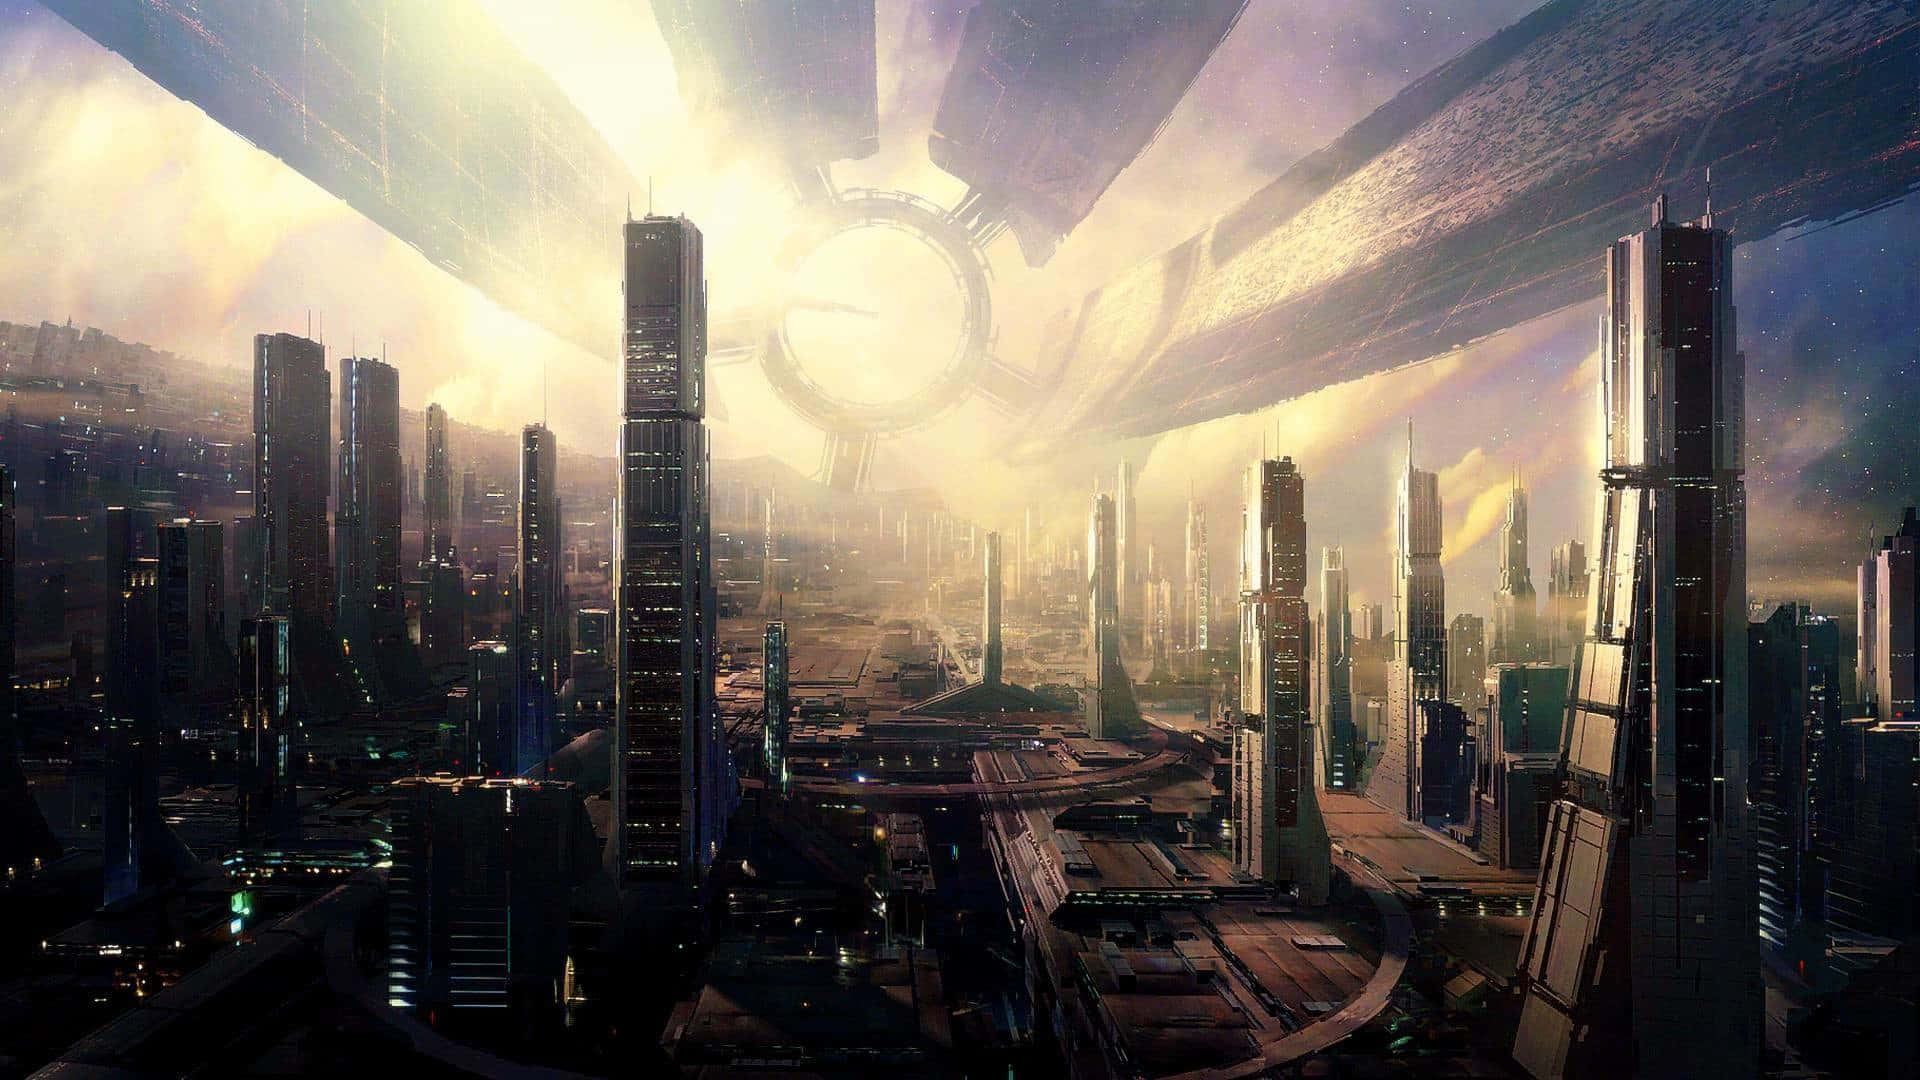 View of a futuristic city with bright lights and tall skyscrapers Wallpaper